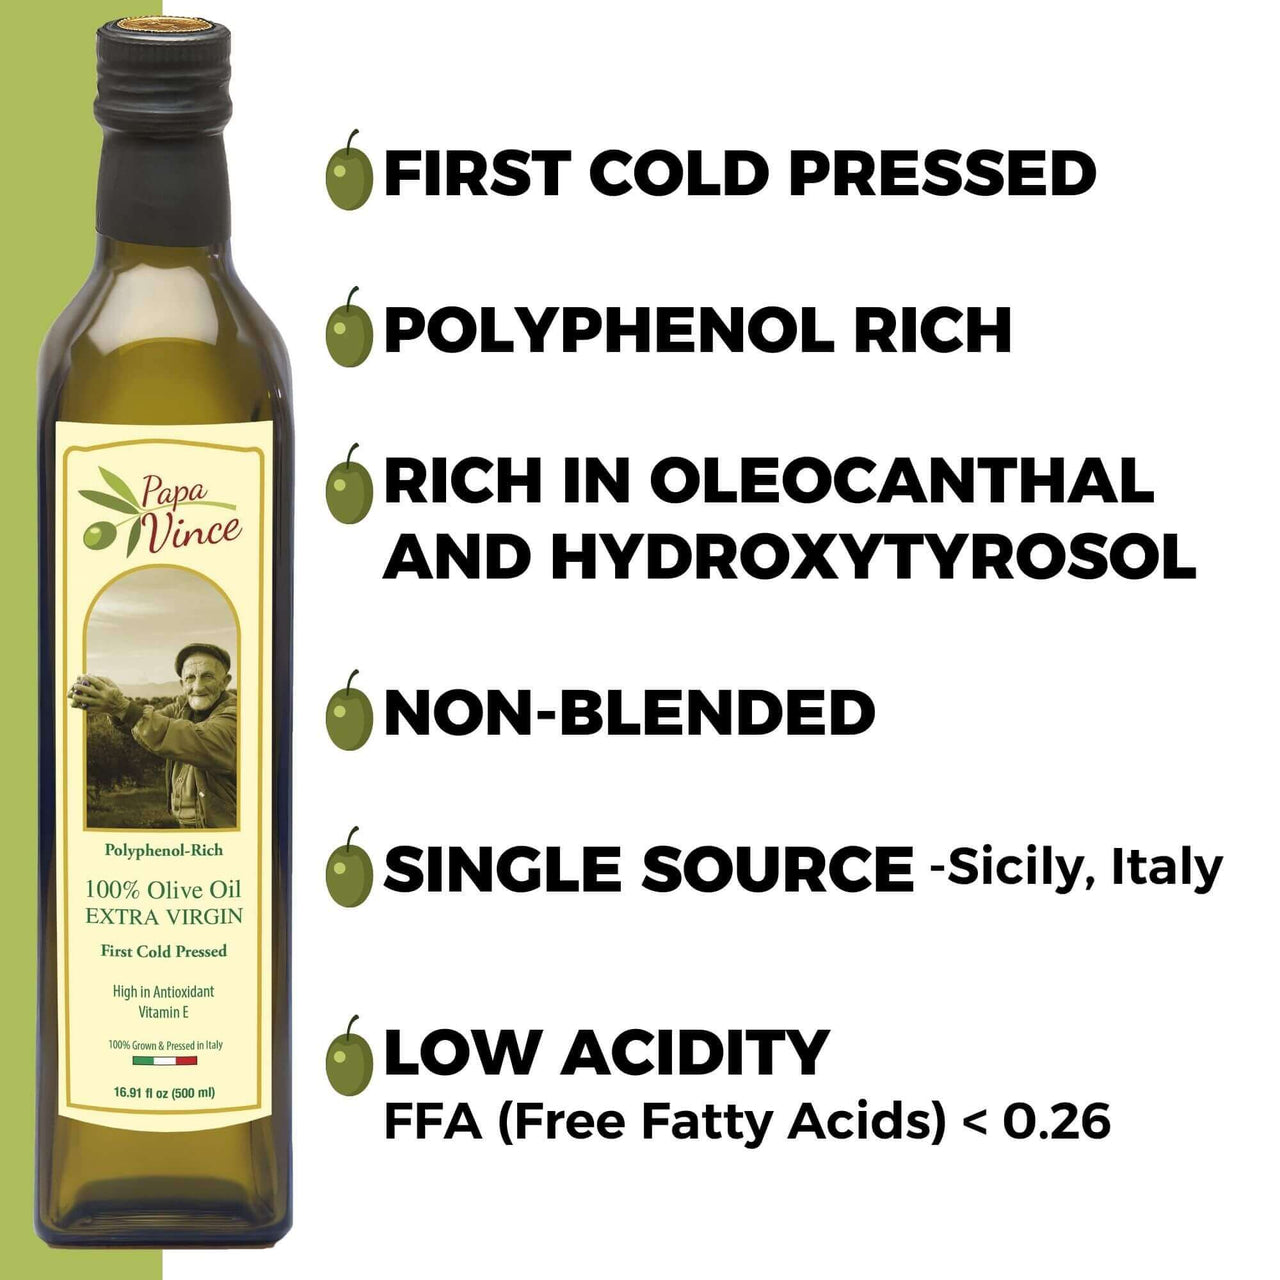 Papa Vince Olive Oil Extra Virgin - 3Bottles Save $13.00 with Subscription - Papa Vinc